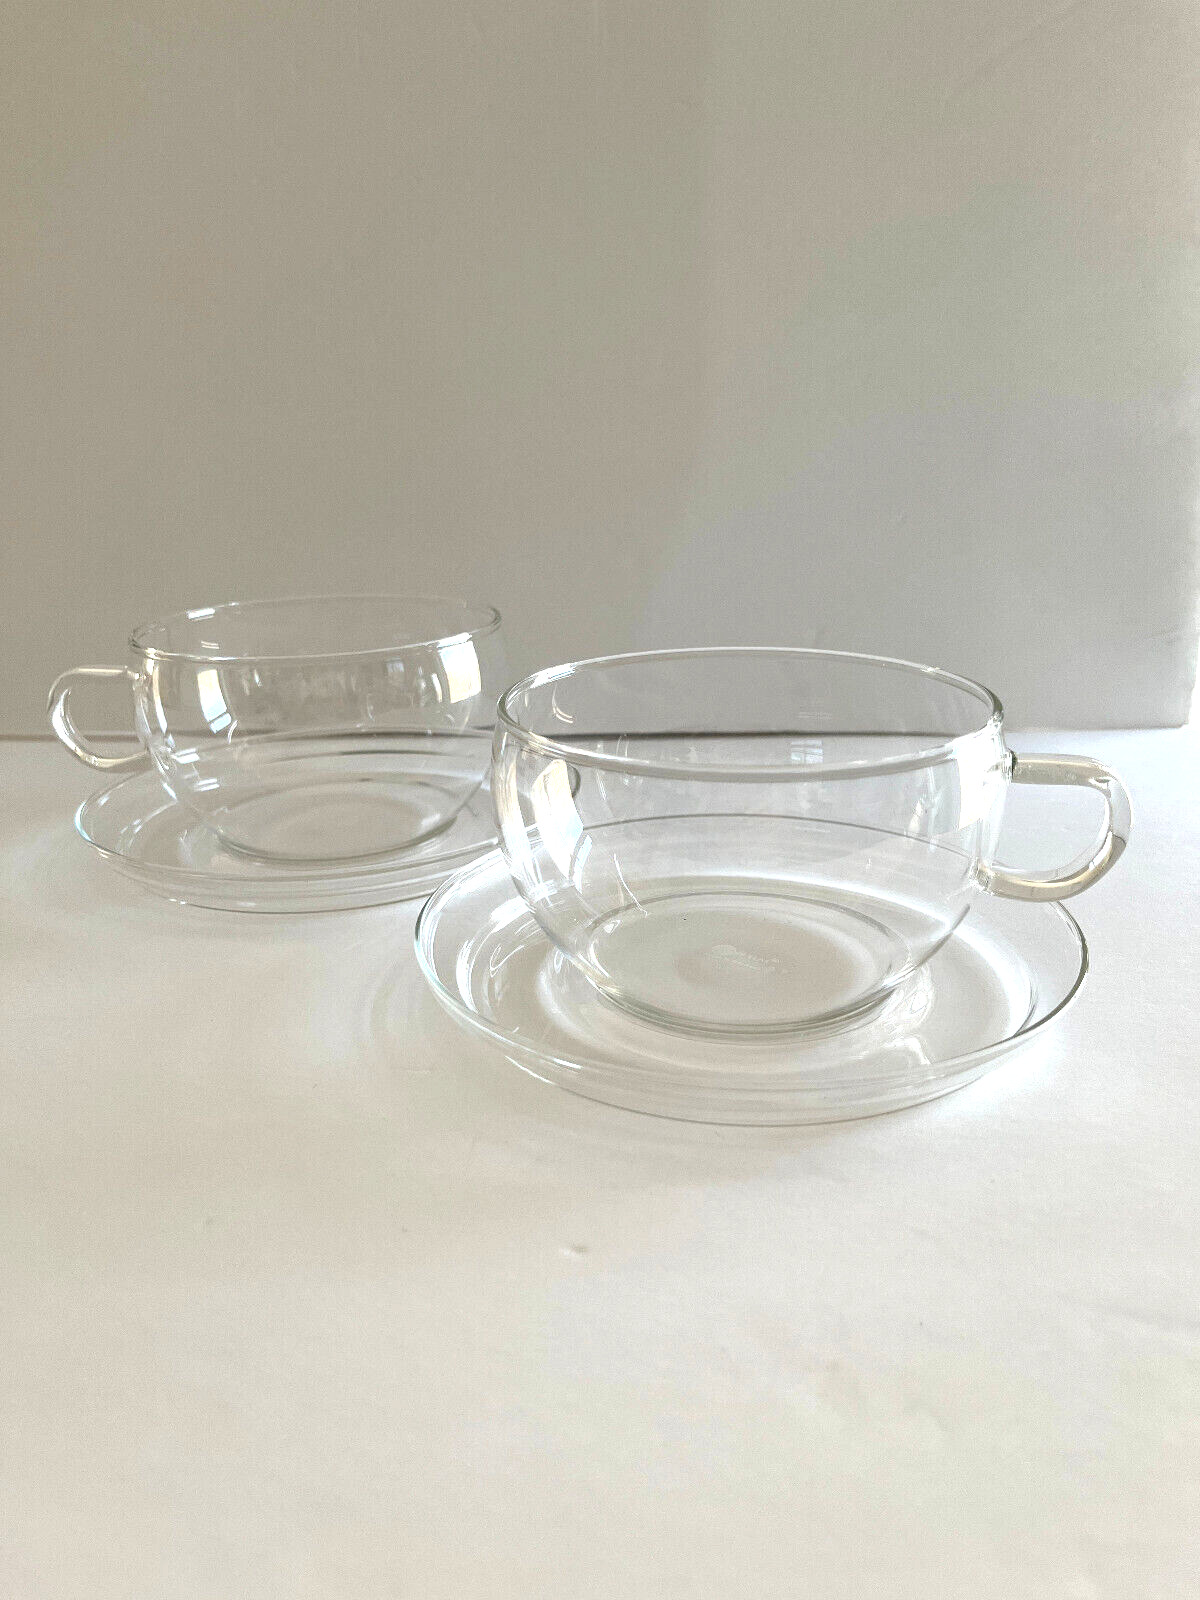 Vintage Jenaer Glas Clear Coffee Cup + Saucer Germany Tea Glass Modern SET OF 2